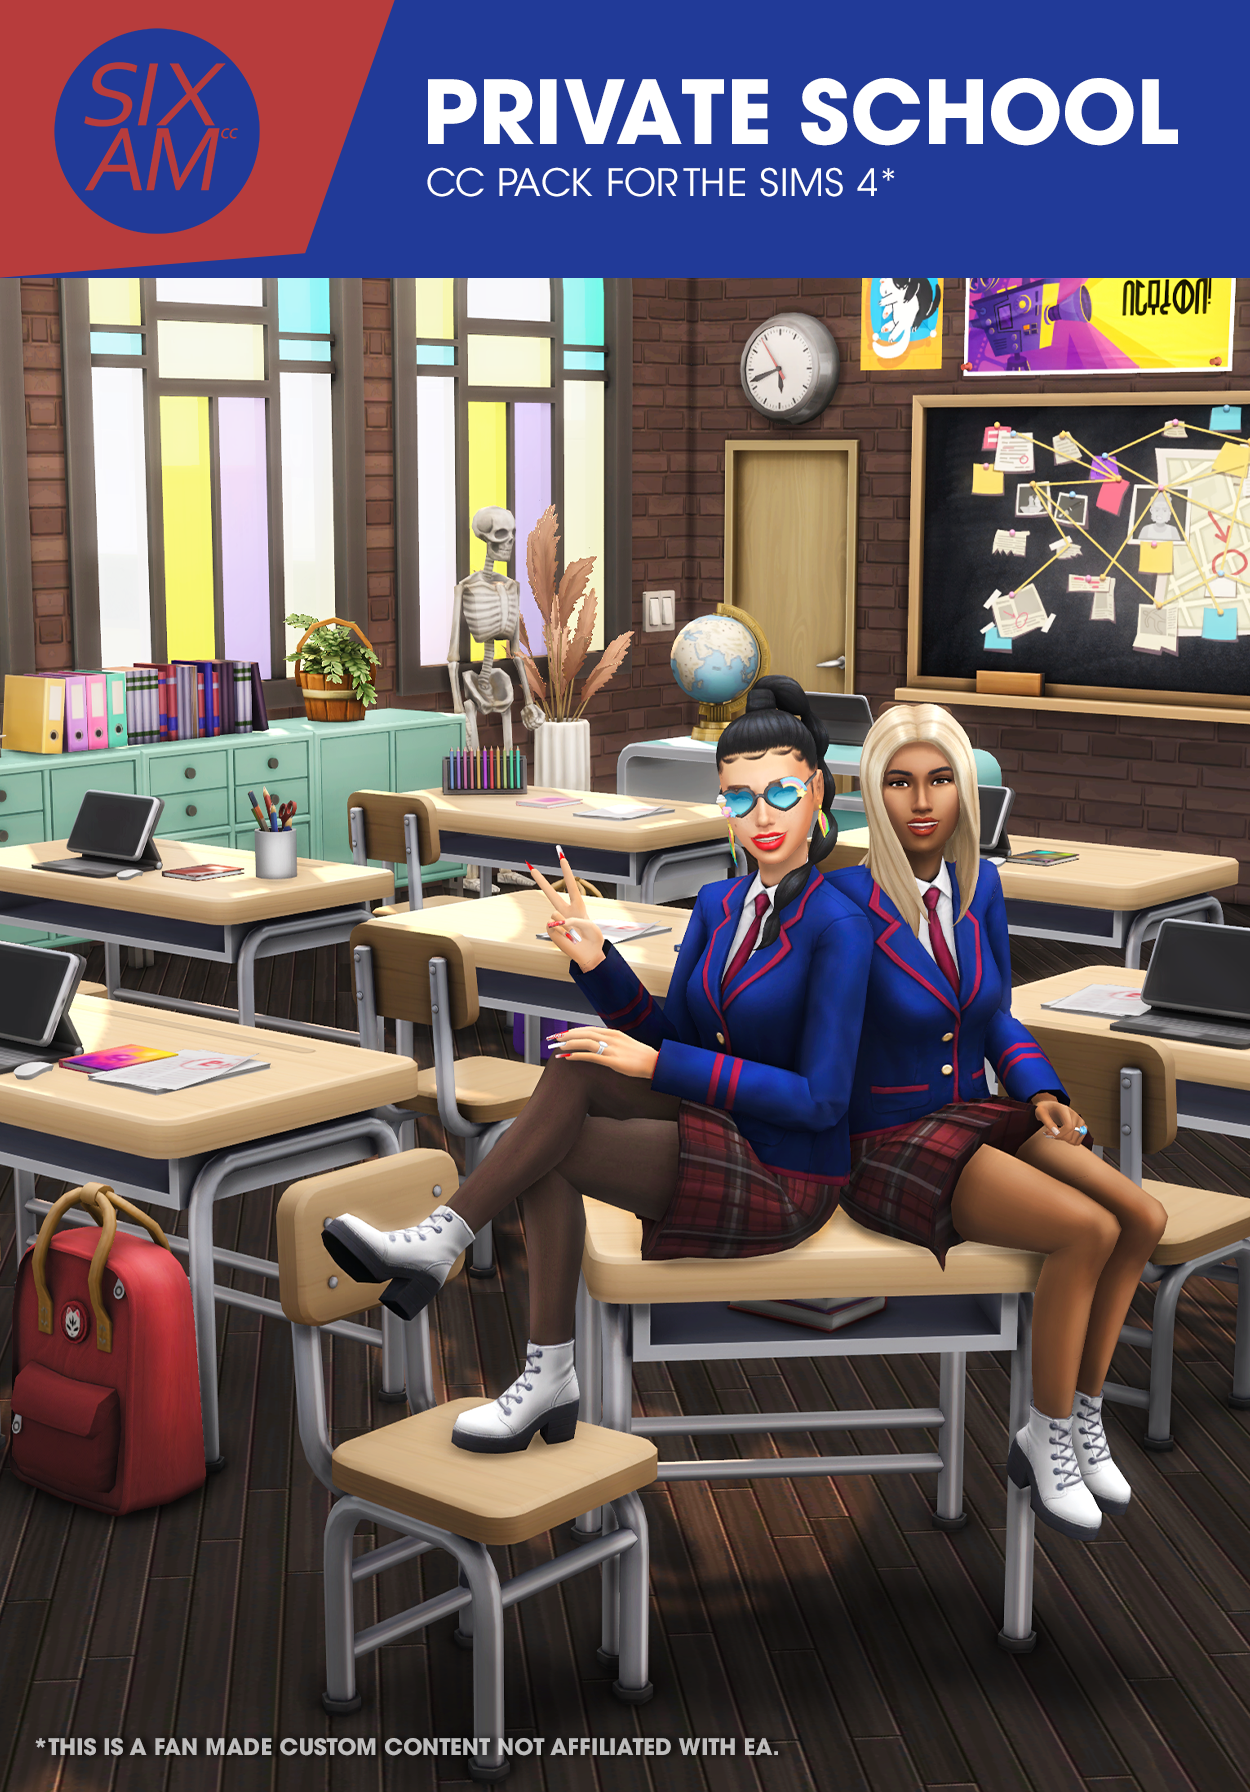 Private School CC Pack - The Sims 4 Build / Buy - CurseForge